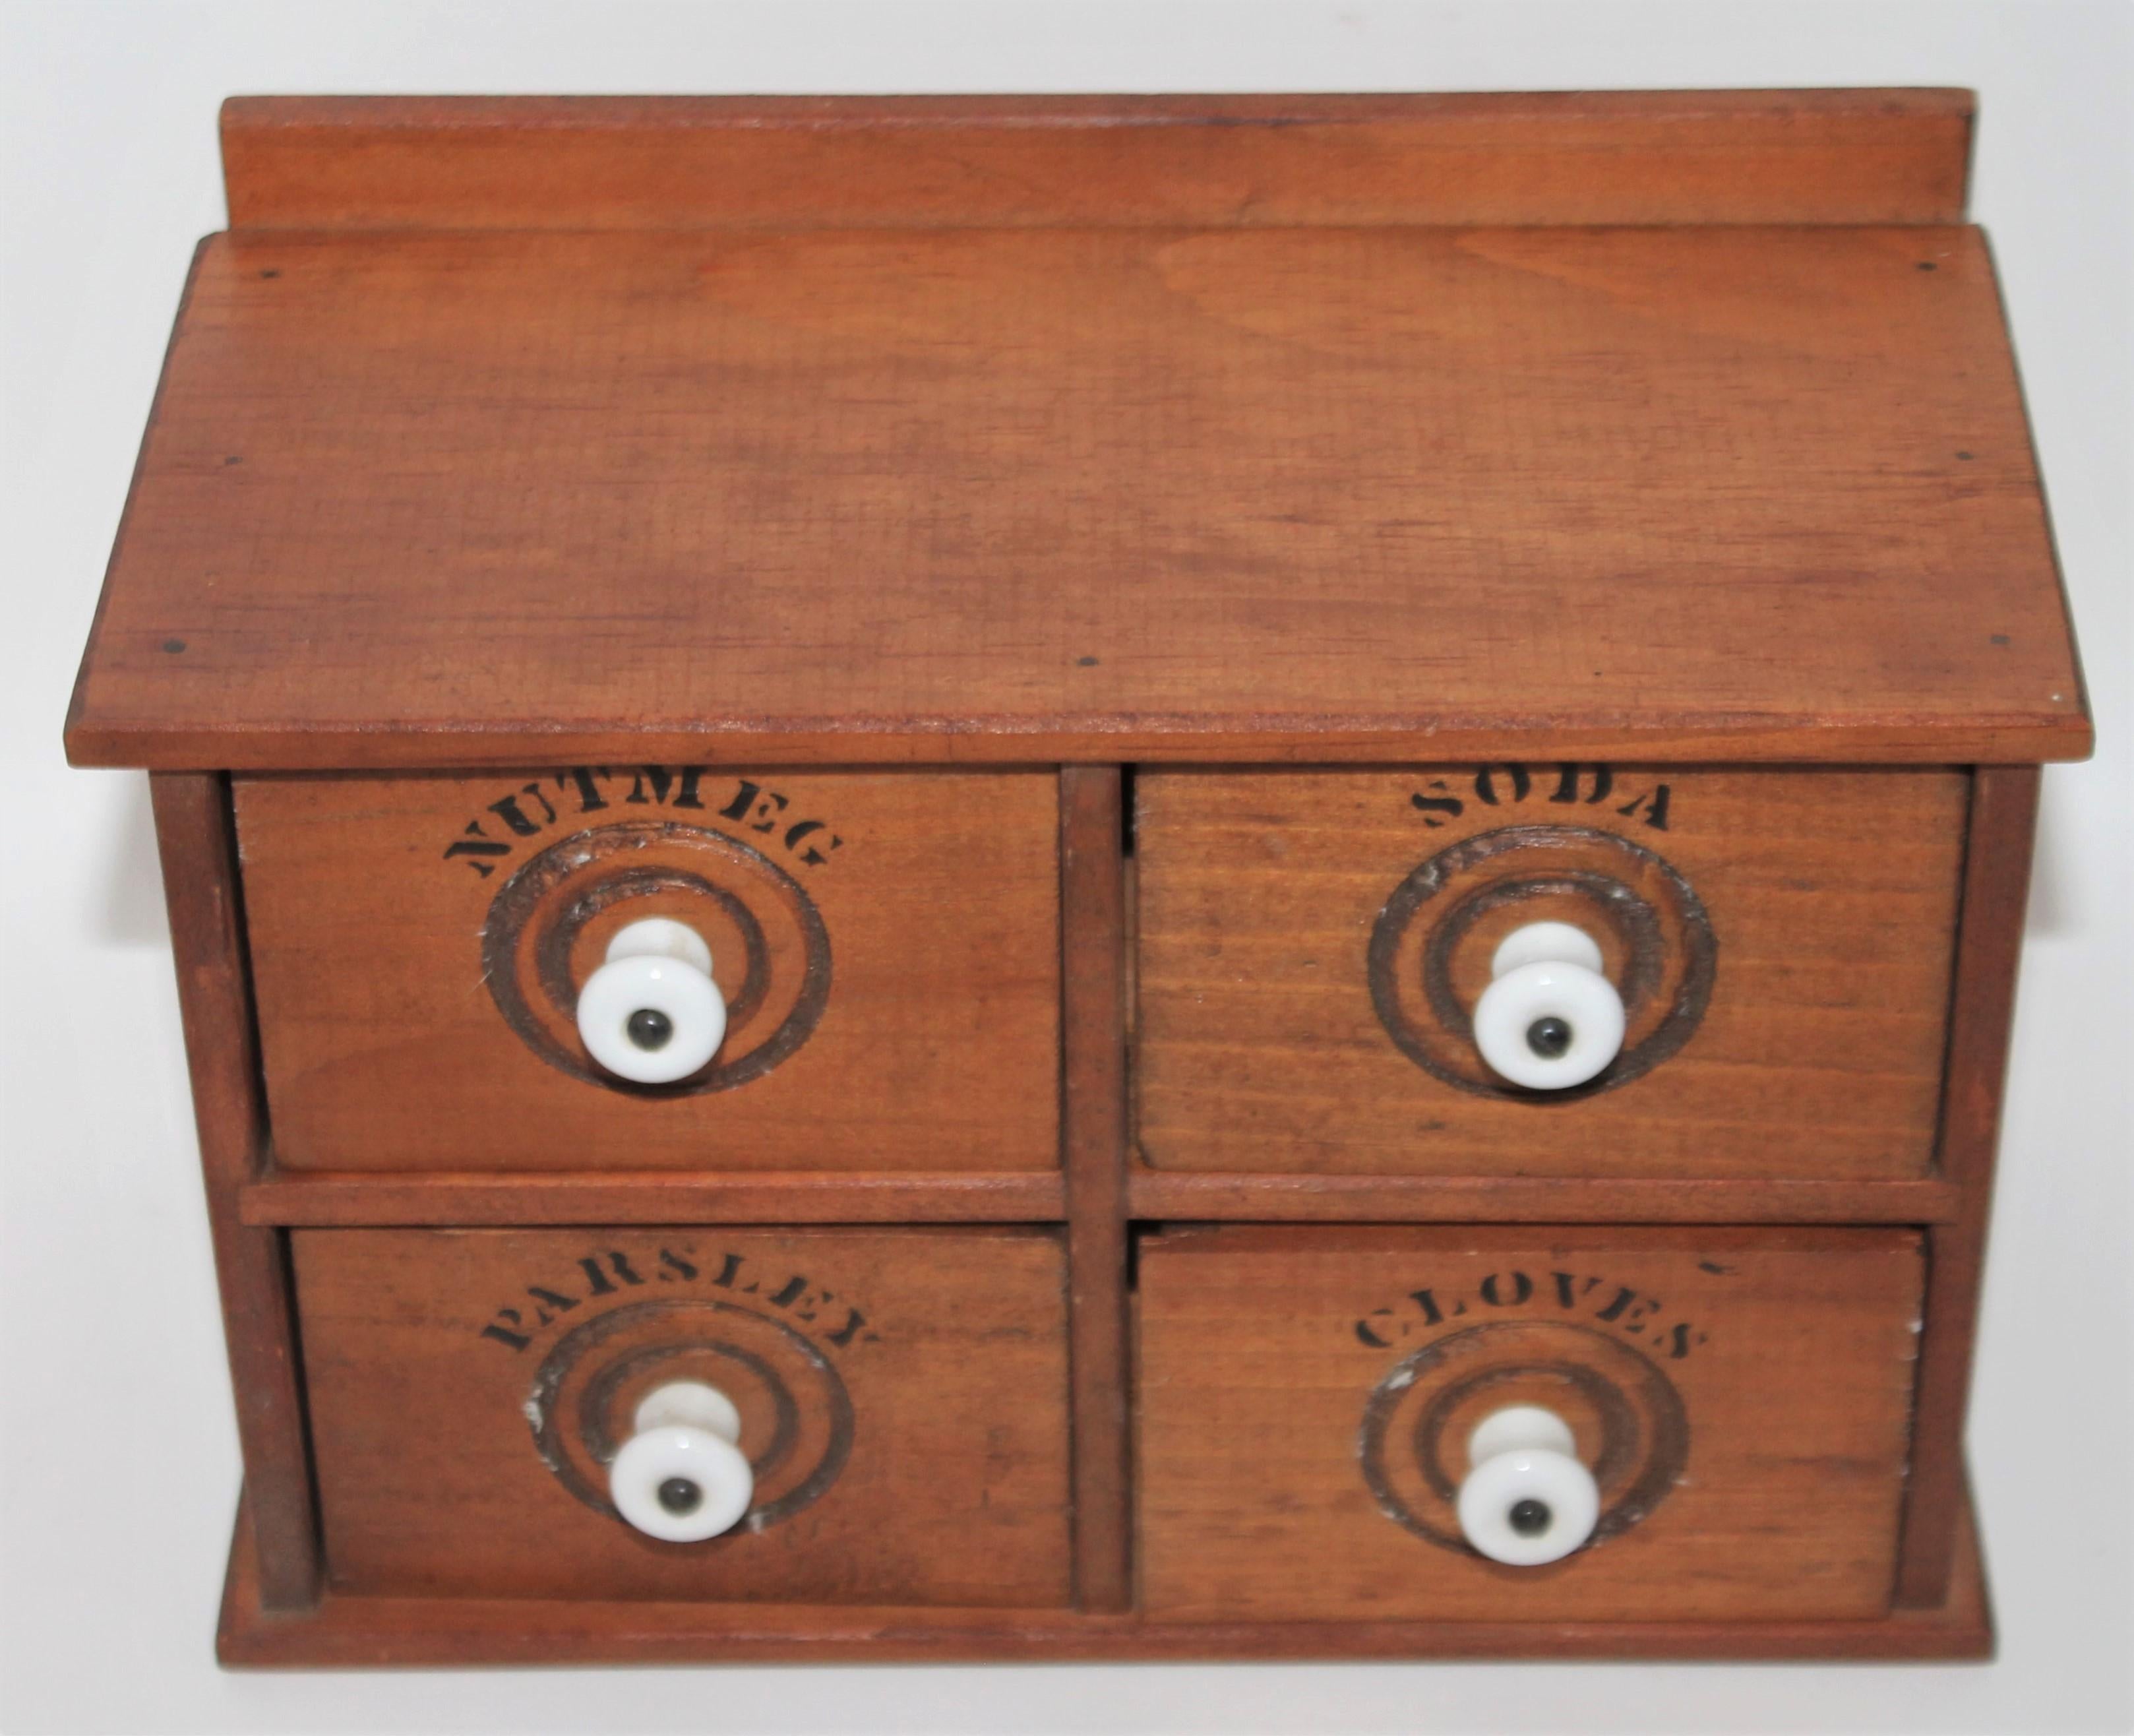 Miniature early 20th century spice box with original hardware and original porcelain drawer pulls. This small table top spice box has great bones.